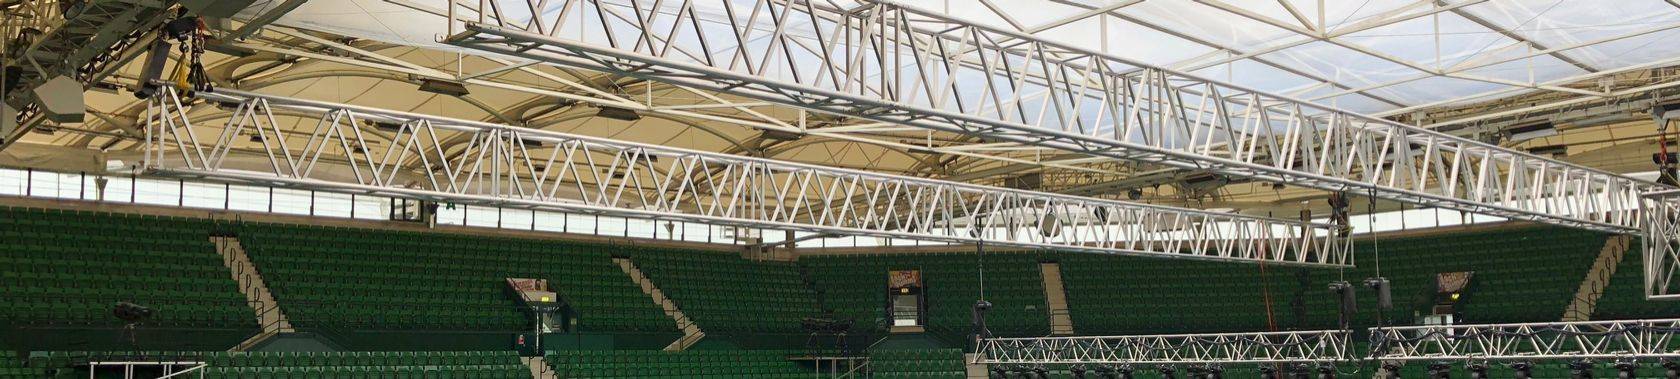 Prolyte M145RV Truss used at the Gerry Weber Stadium